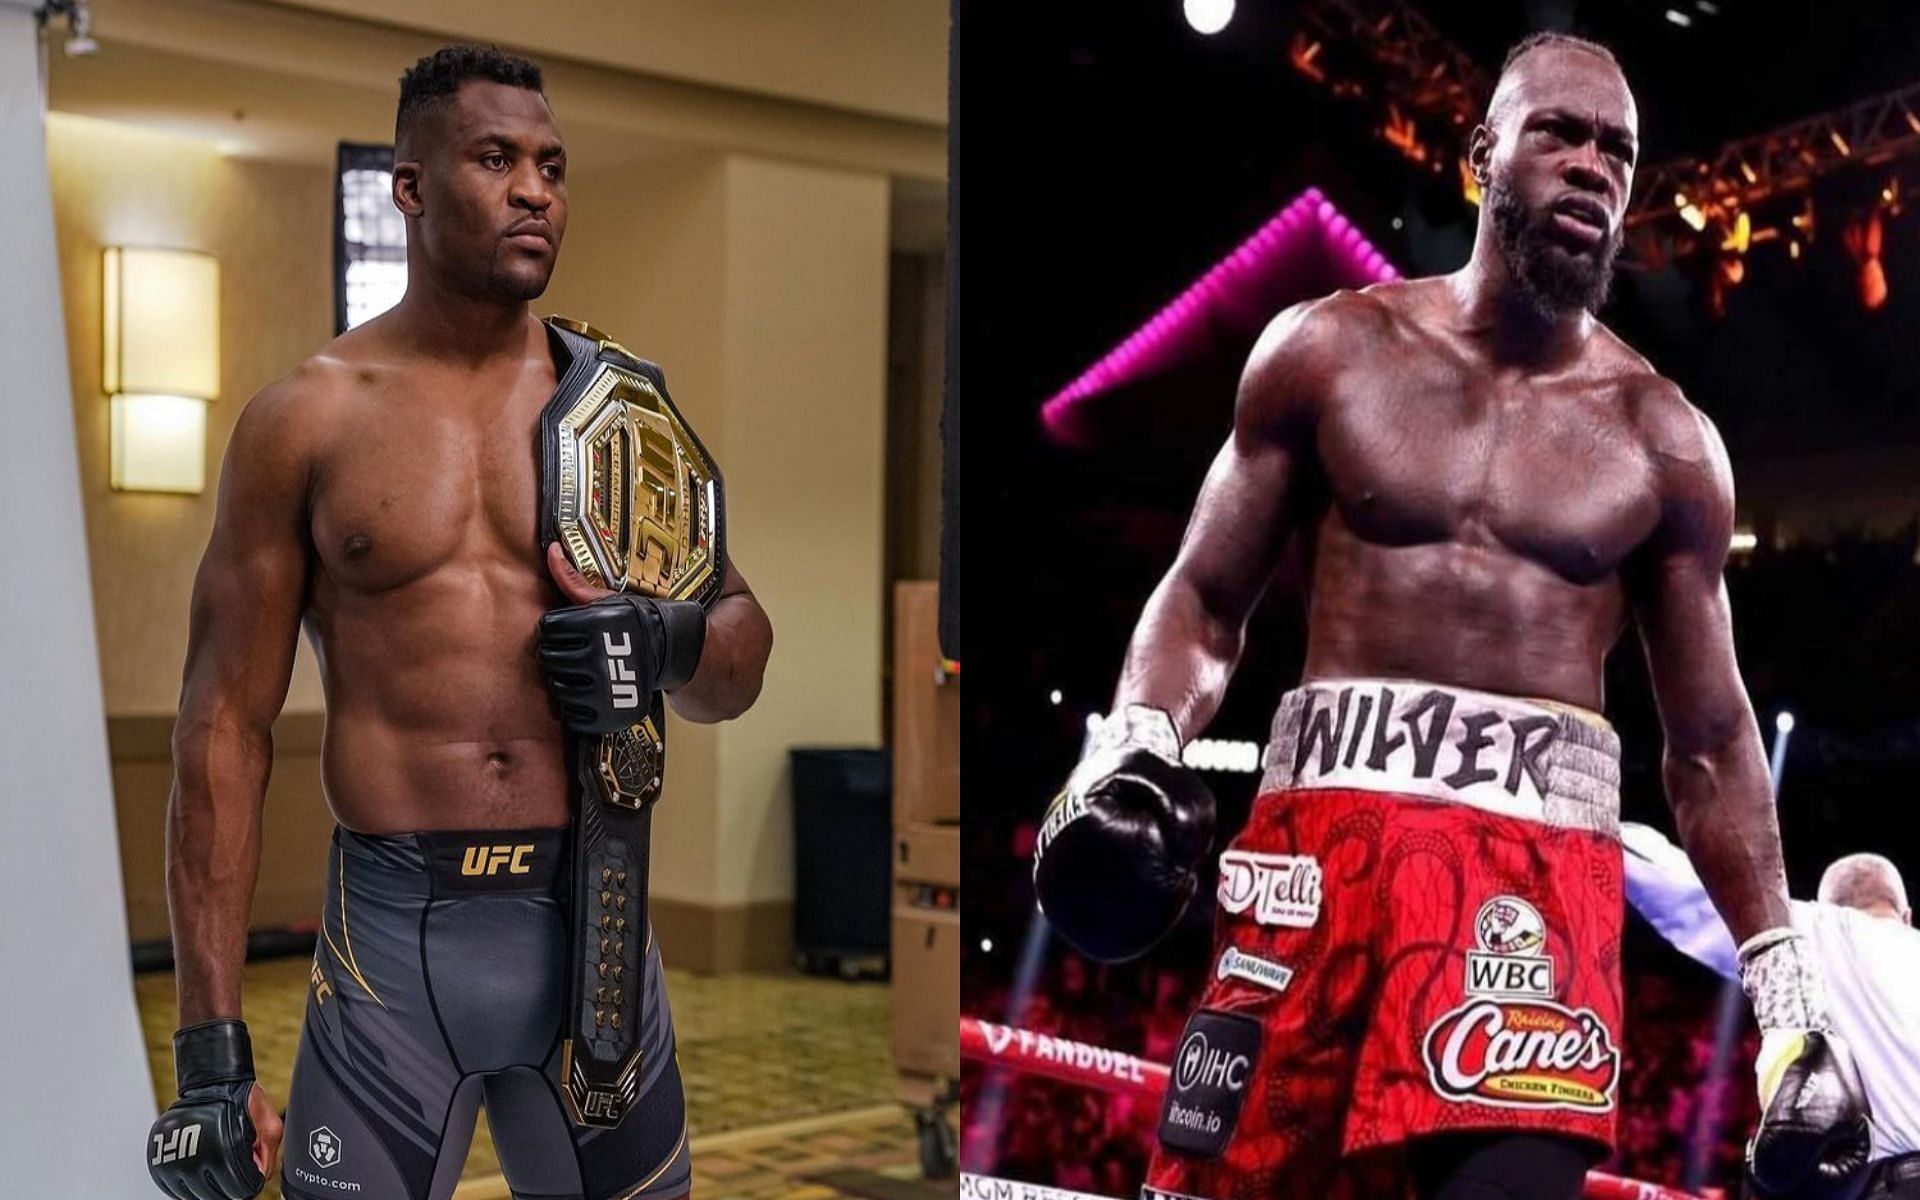 Francis Ngannou (left) and Deontay Wilder (right) [Images Courtesy: @francisngannou and @bronzebmber on Instagram]